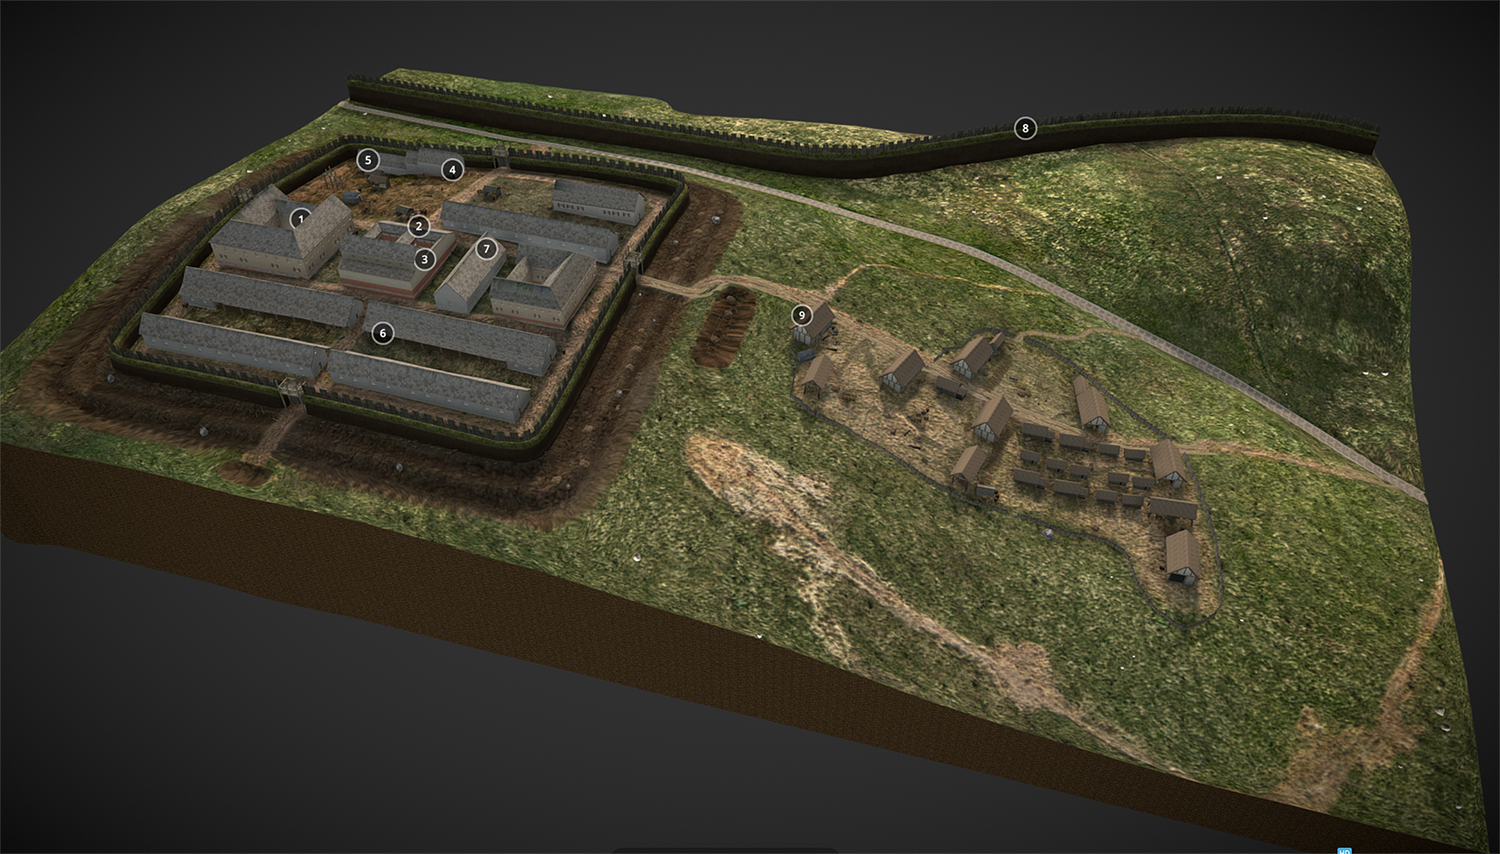 A digital reconstruction of a Roman fort. The fort is located on a hillside beside a large defensive wall. There is a walled section containing orderly military buildings and a village-like collection of buildings outside the walls. 